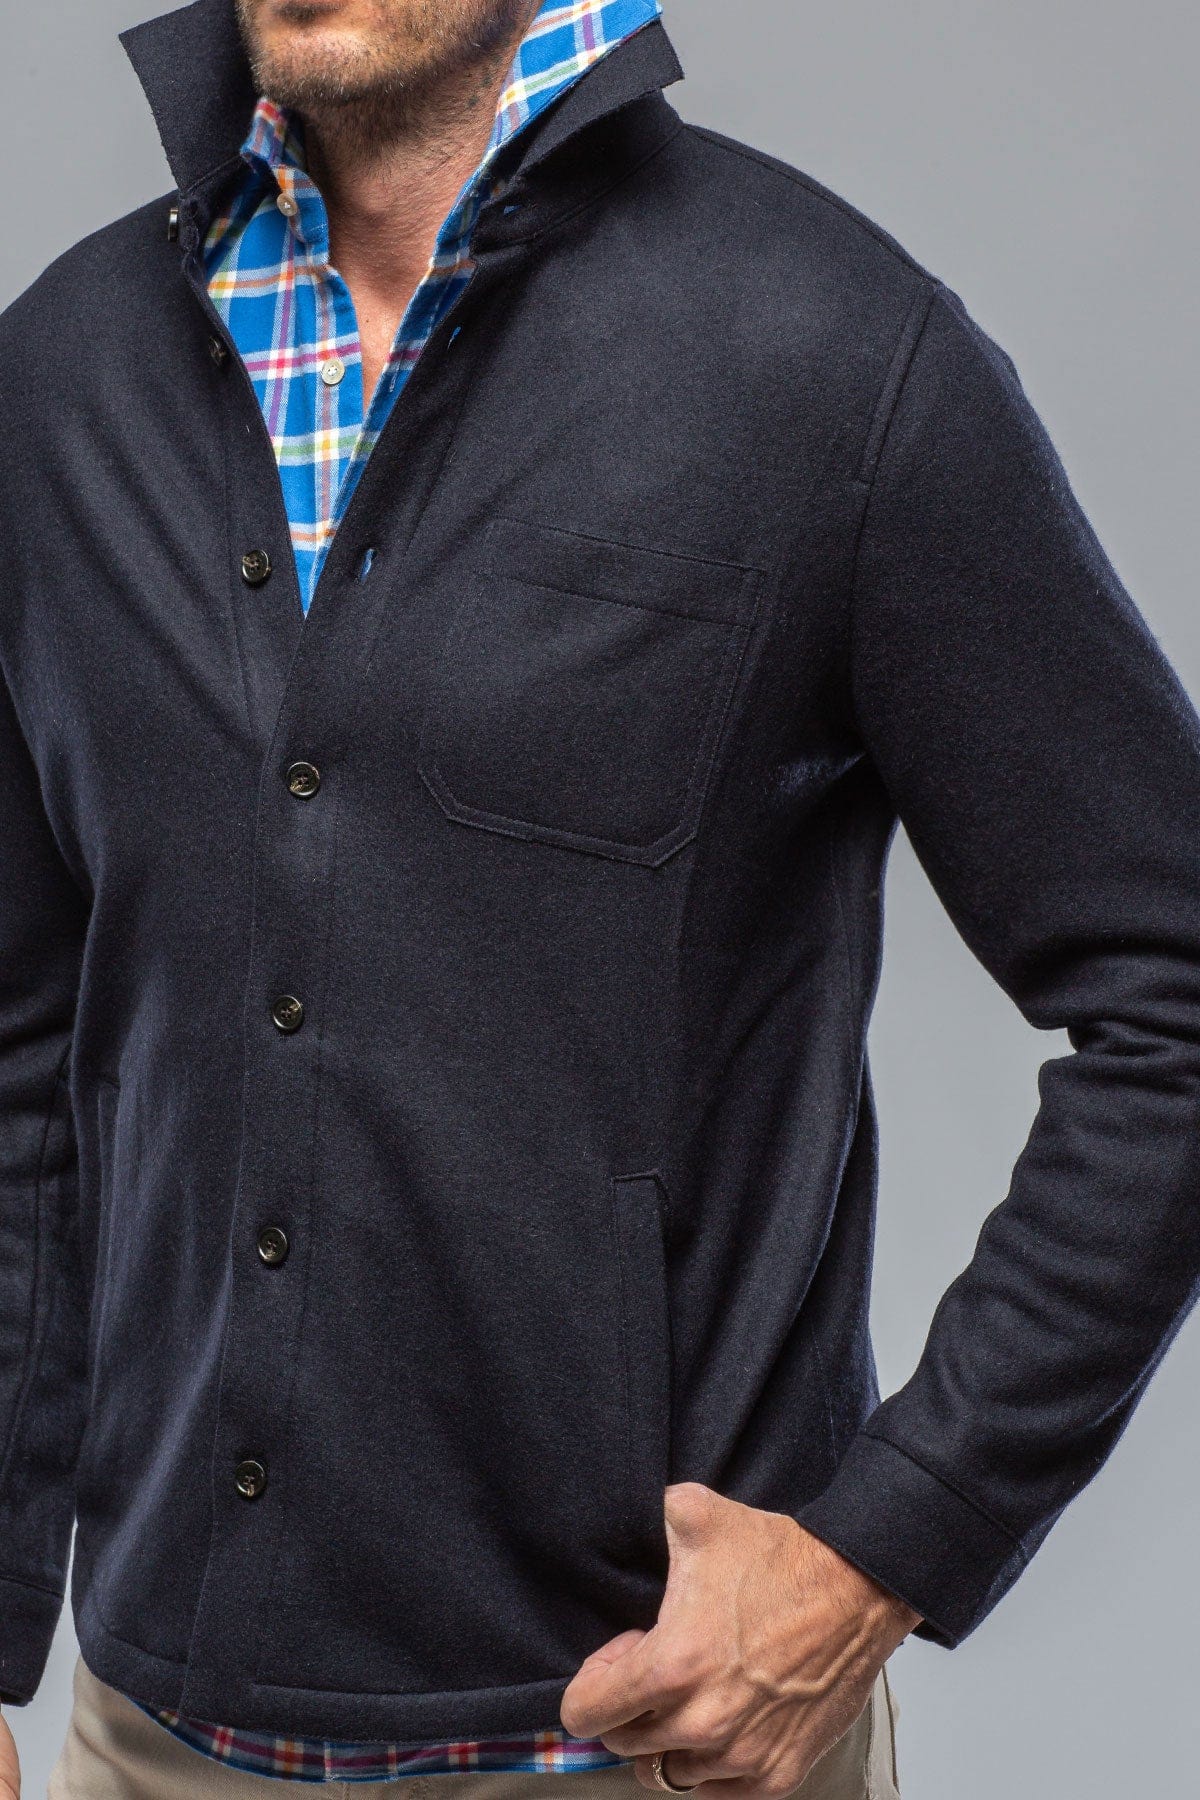 Sooter Cashmere Shirt In Navy - AXEL'S